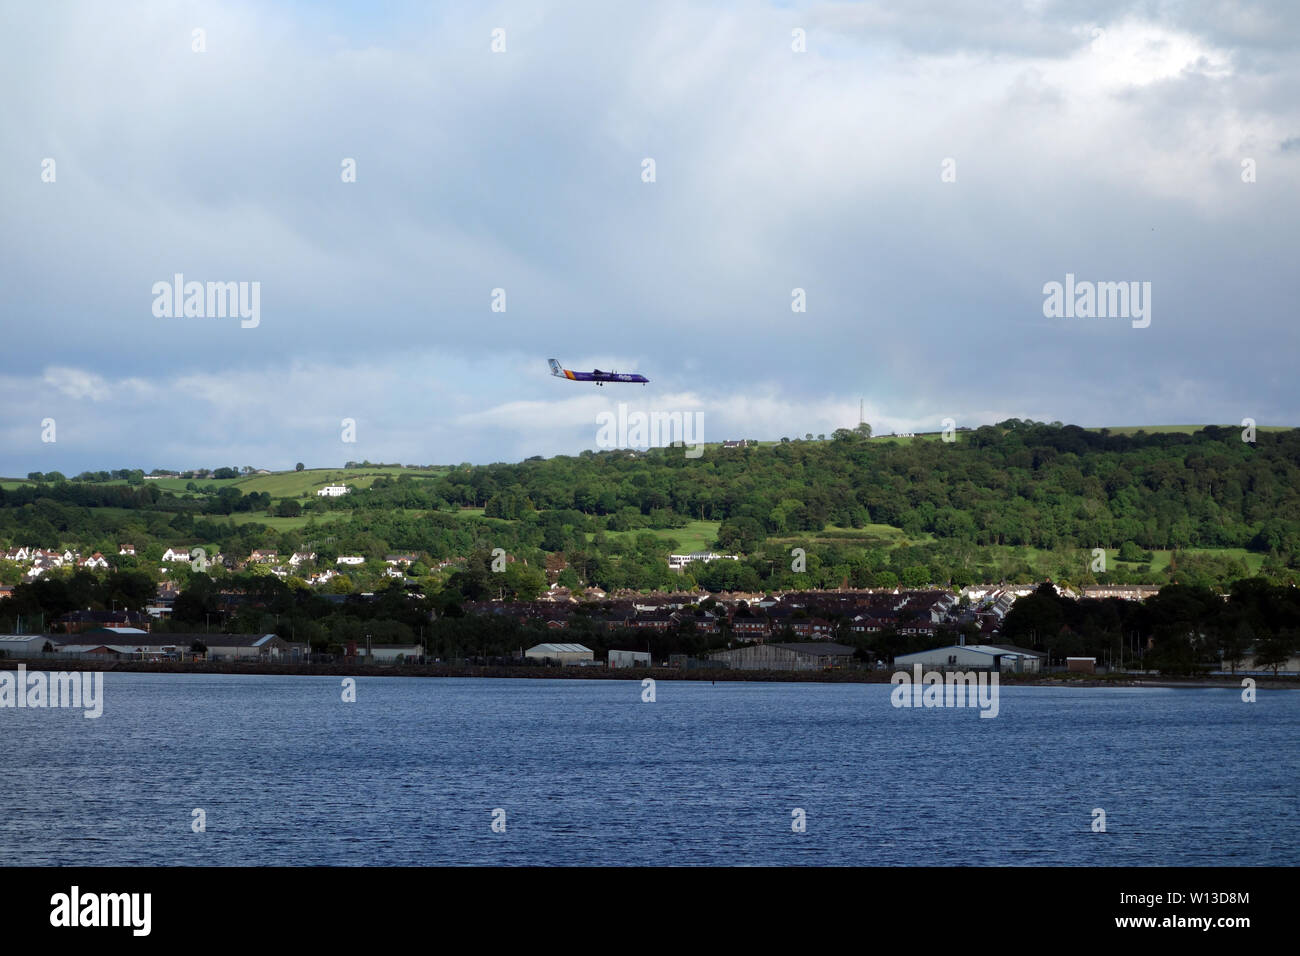 Flybe Bombardier Q400 Propeller Plane Landing at George Best City Airport, Belfast, County Down, Northern Ireland, UK. Stock Photo